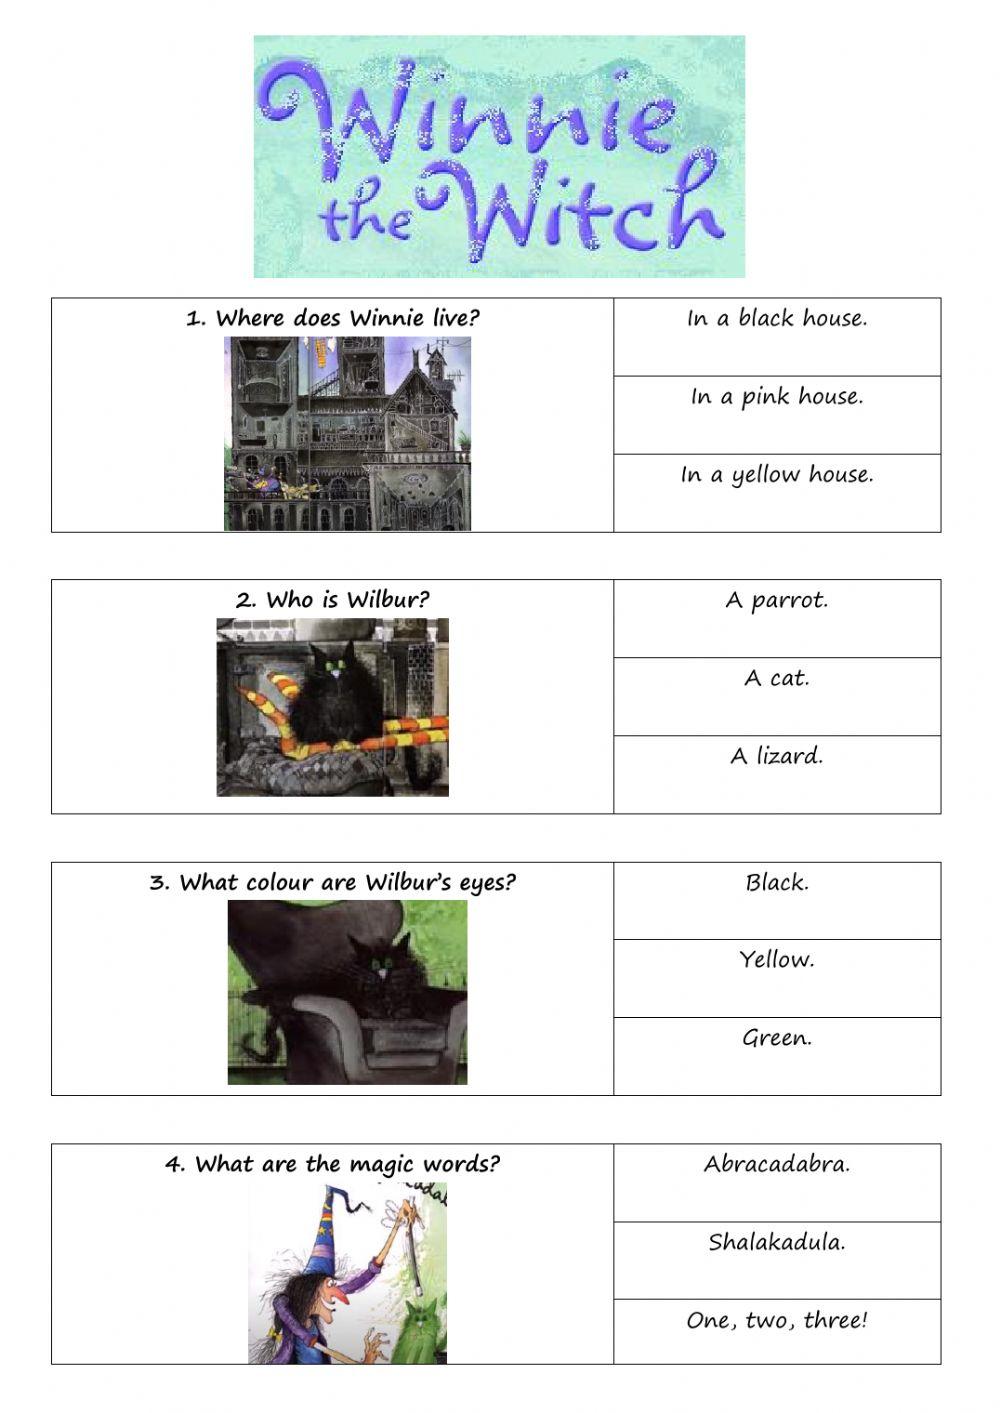 Winnie the witch questionnaire